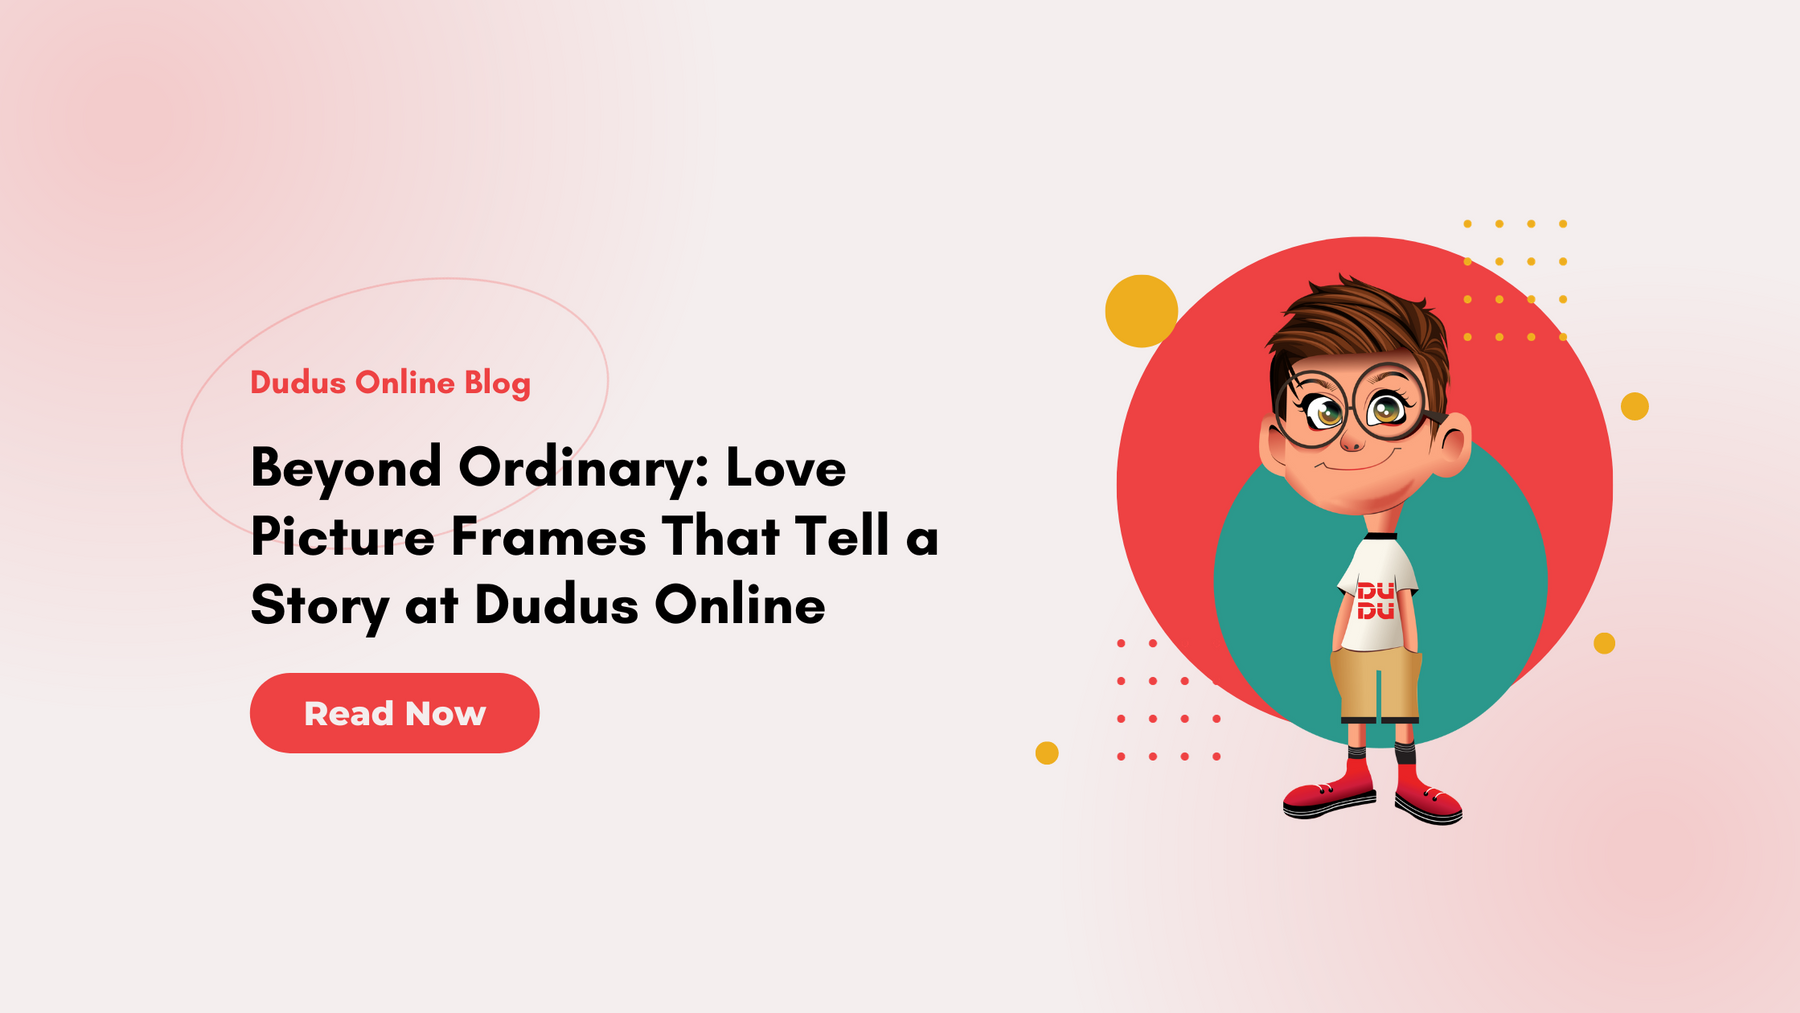 Beyond Ordinary: Love Picture Frames That Tell a Story at Dudus Online